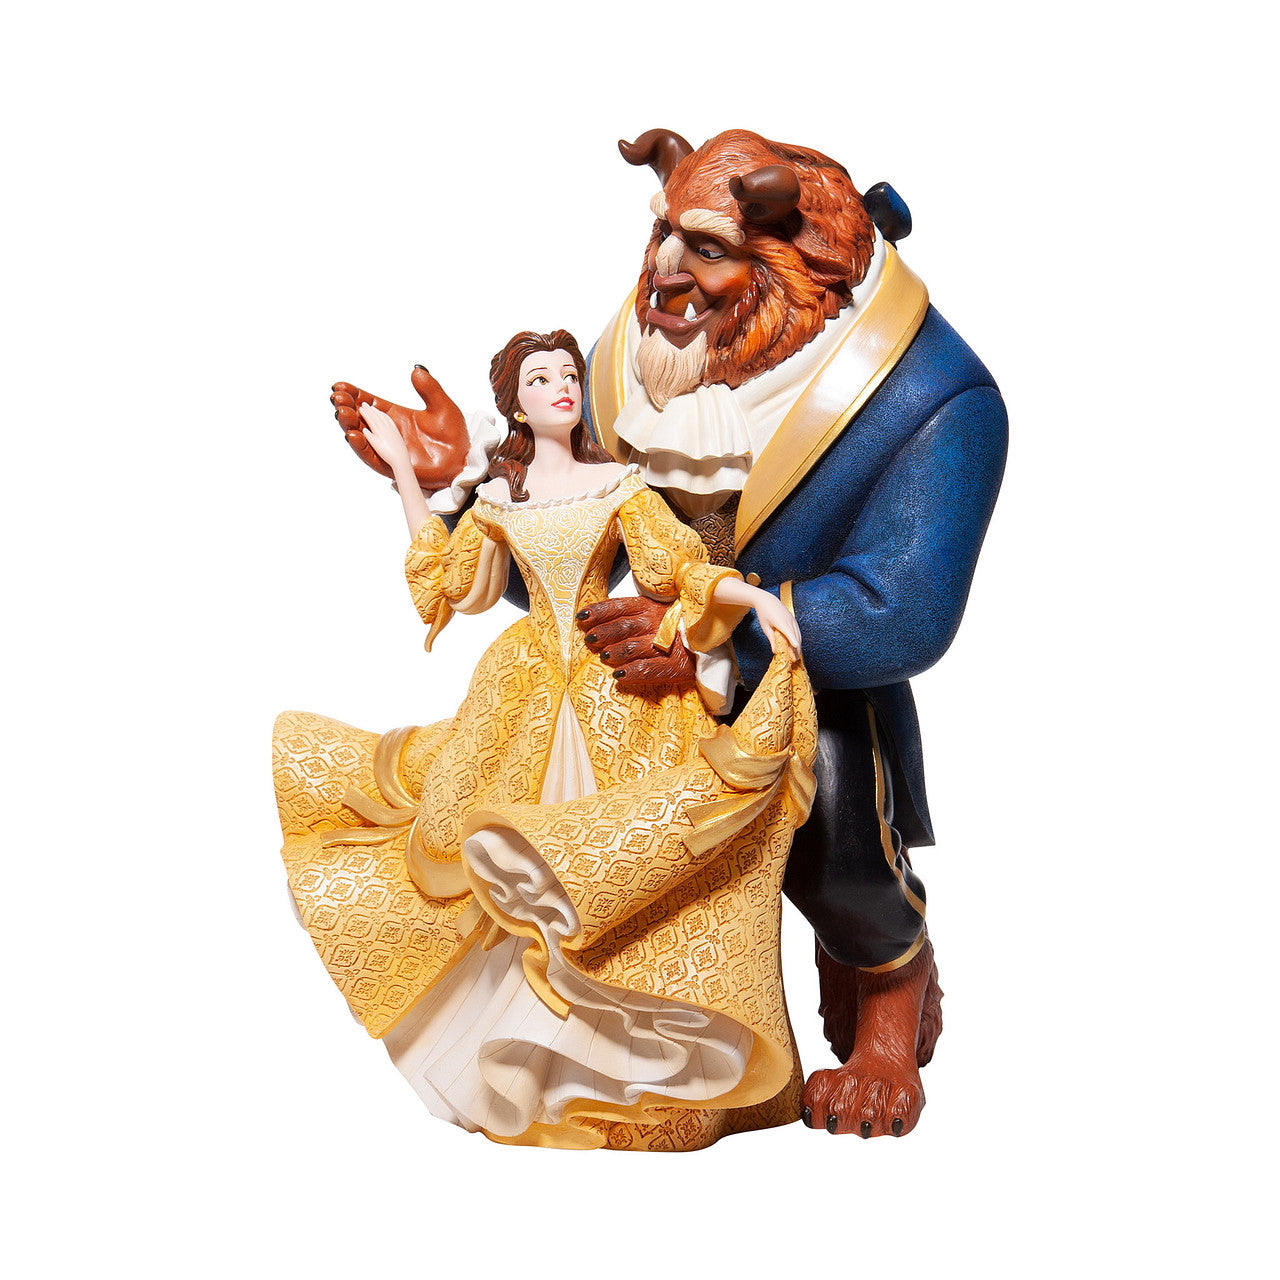 Beauty and the Beast - Deluxe Figurine